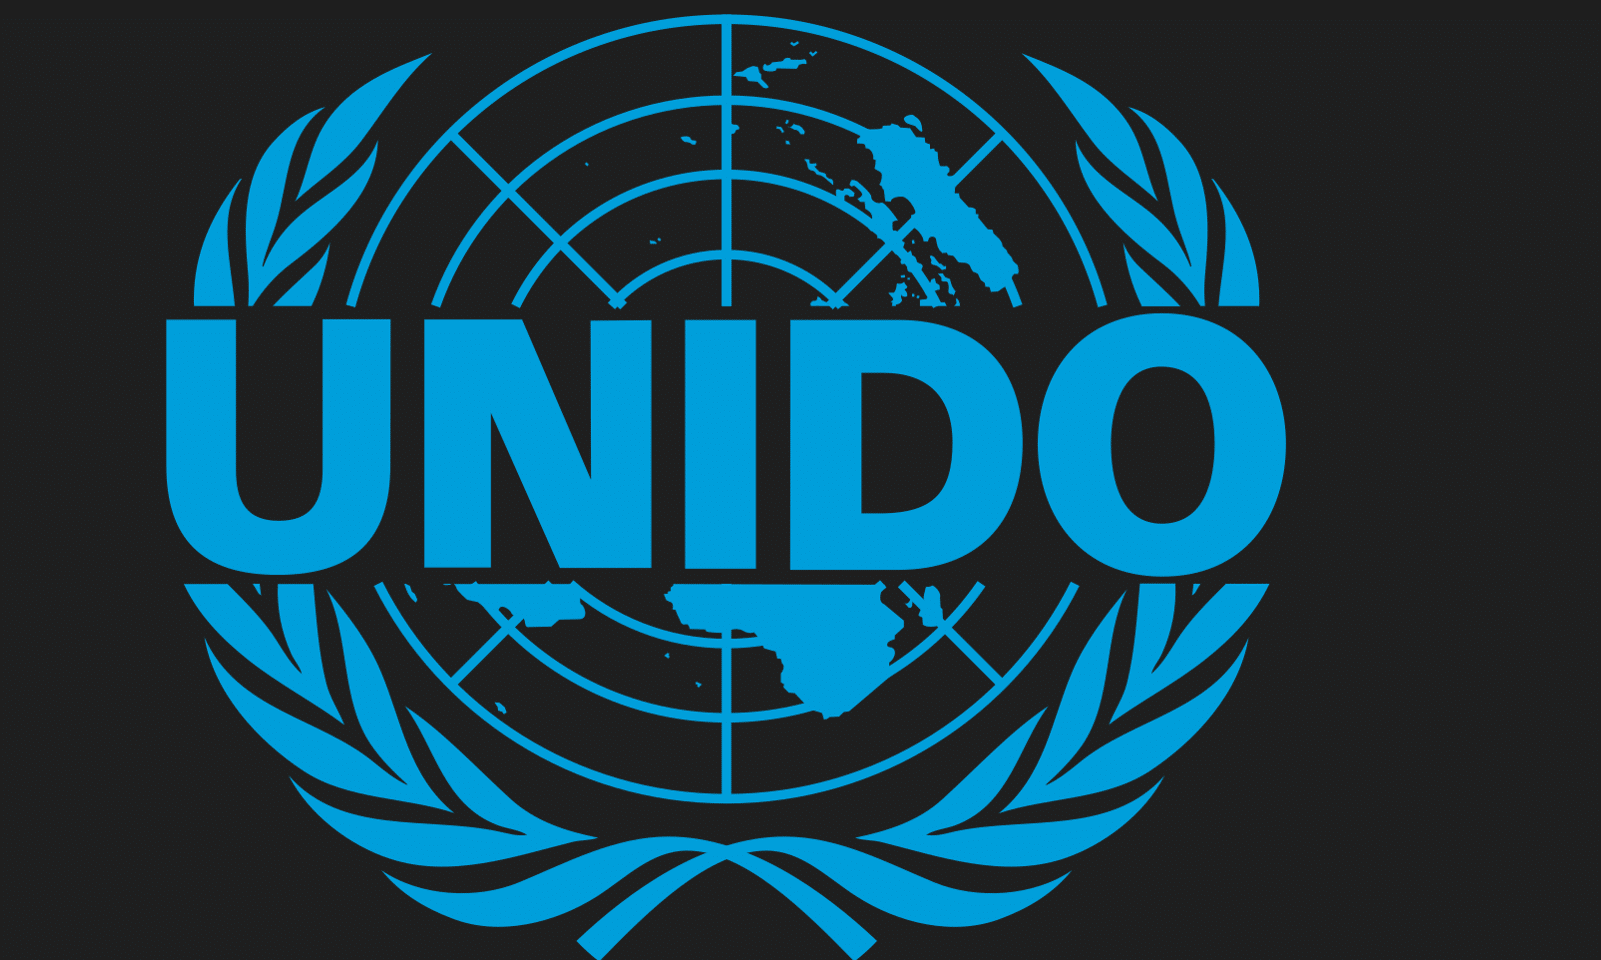 Fiduciary Standard Expert for Climate Finance: UNIDO, Home Based.